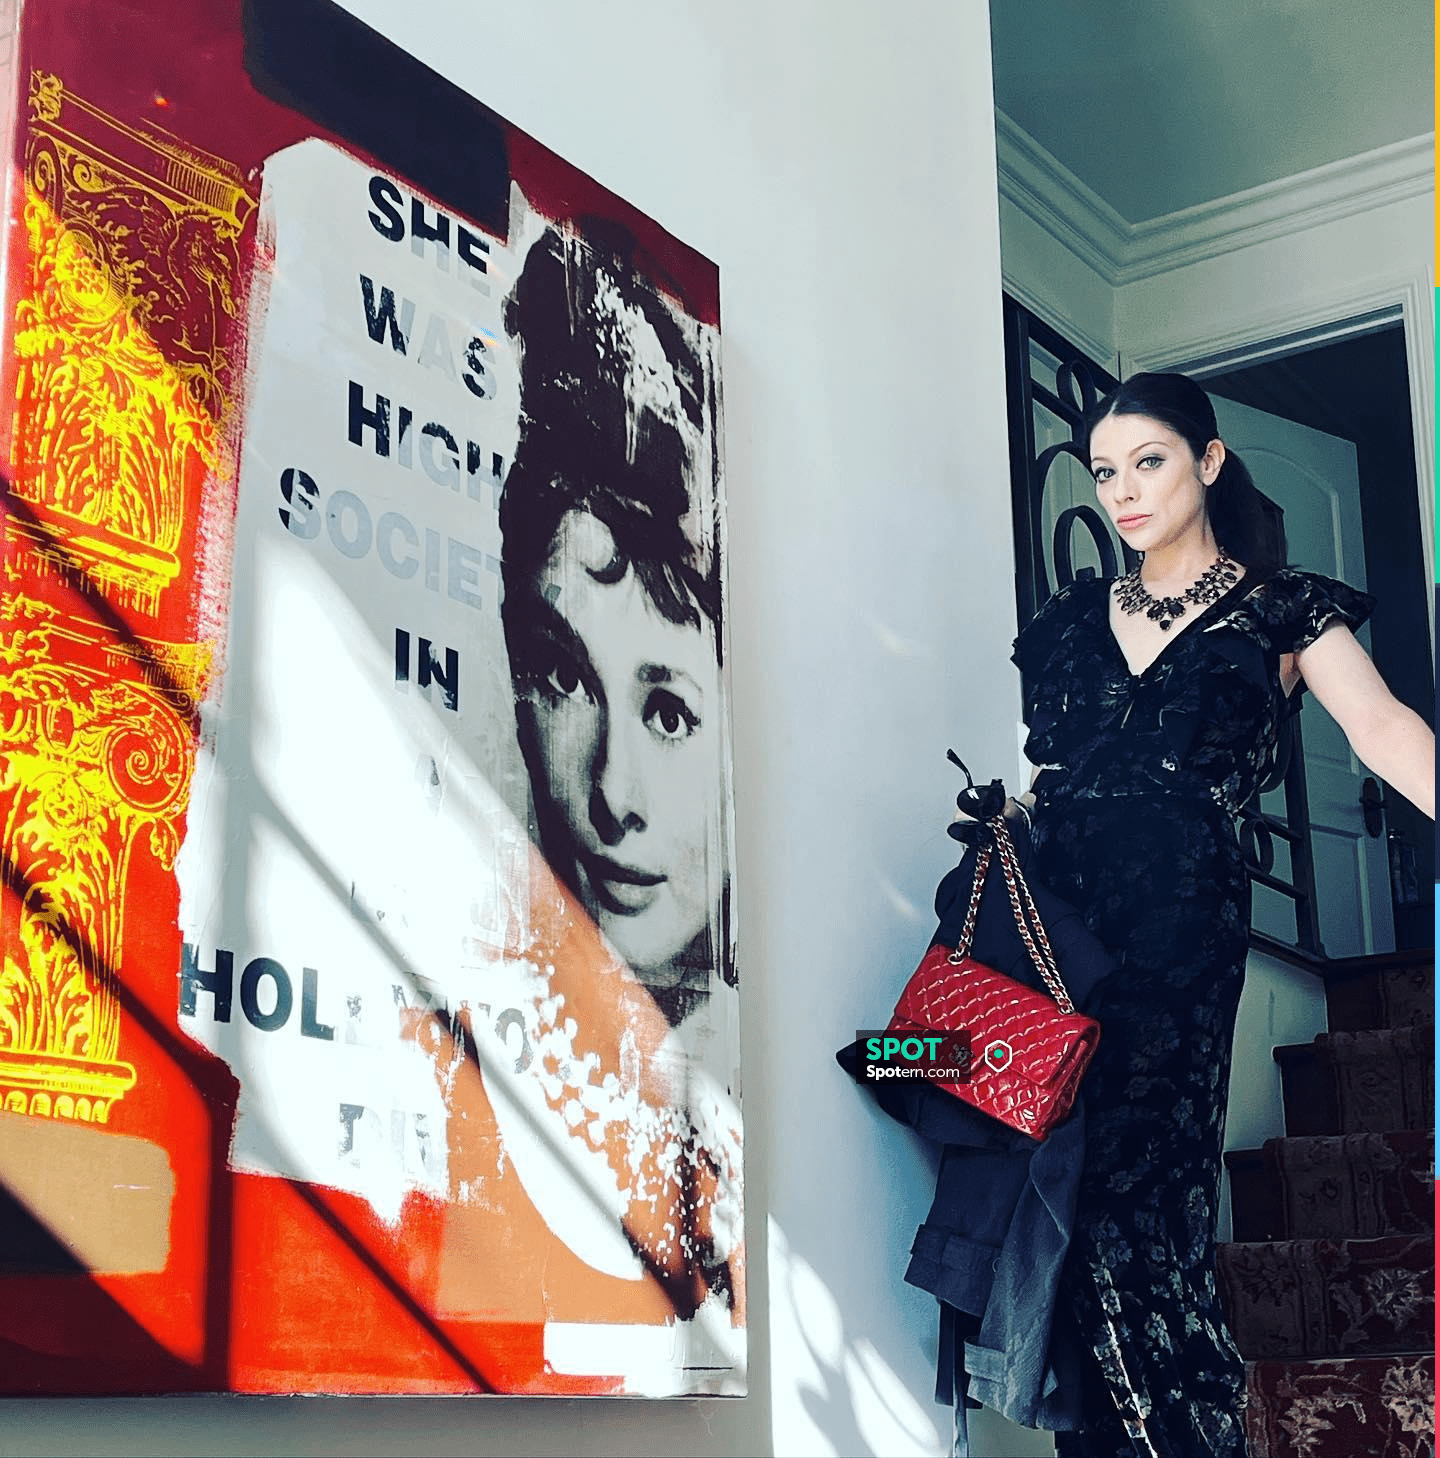 Chanel Classic Flap Bag worn by Michelle Trachtenberg on her Instagram Post  on November 20, 2023